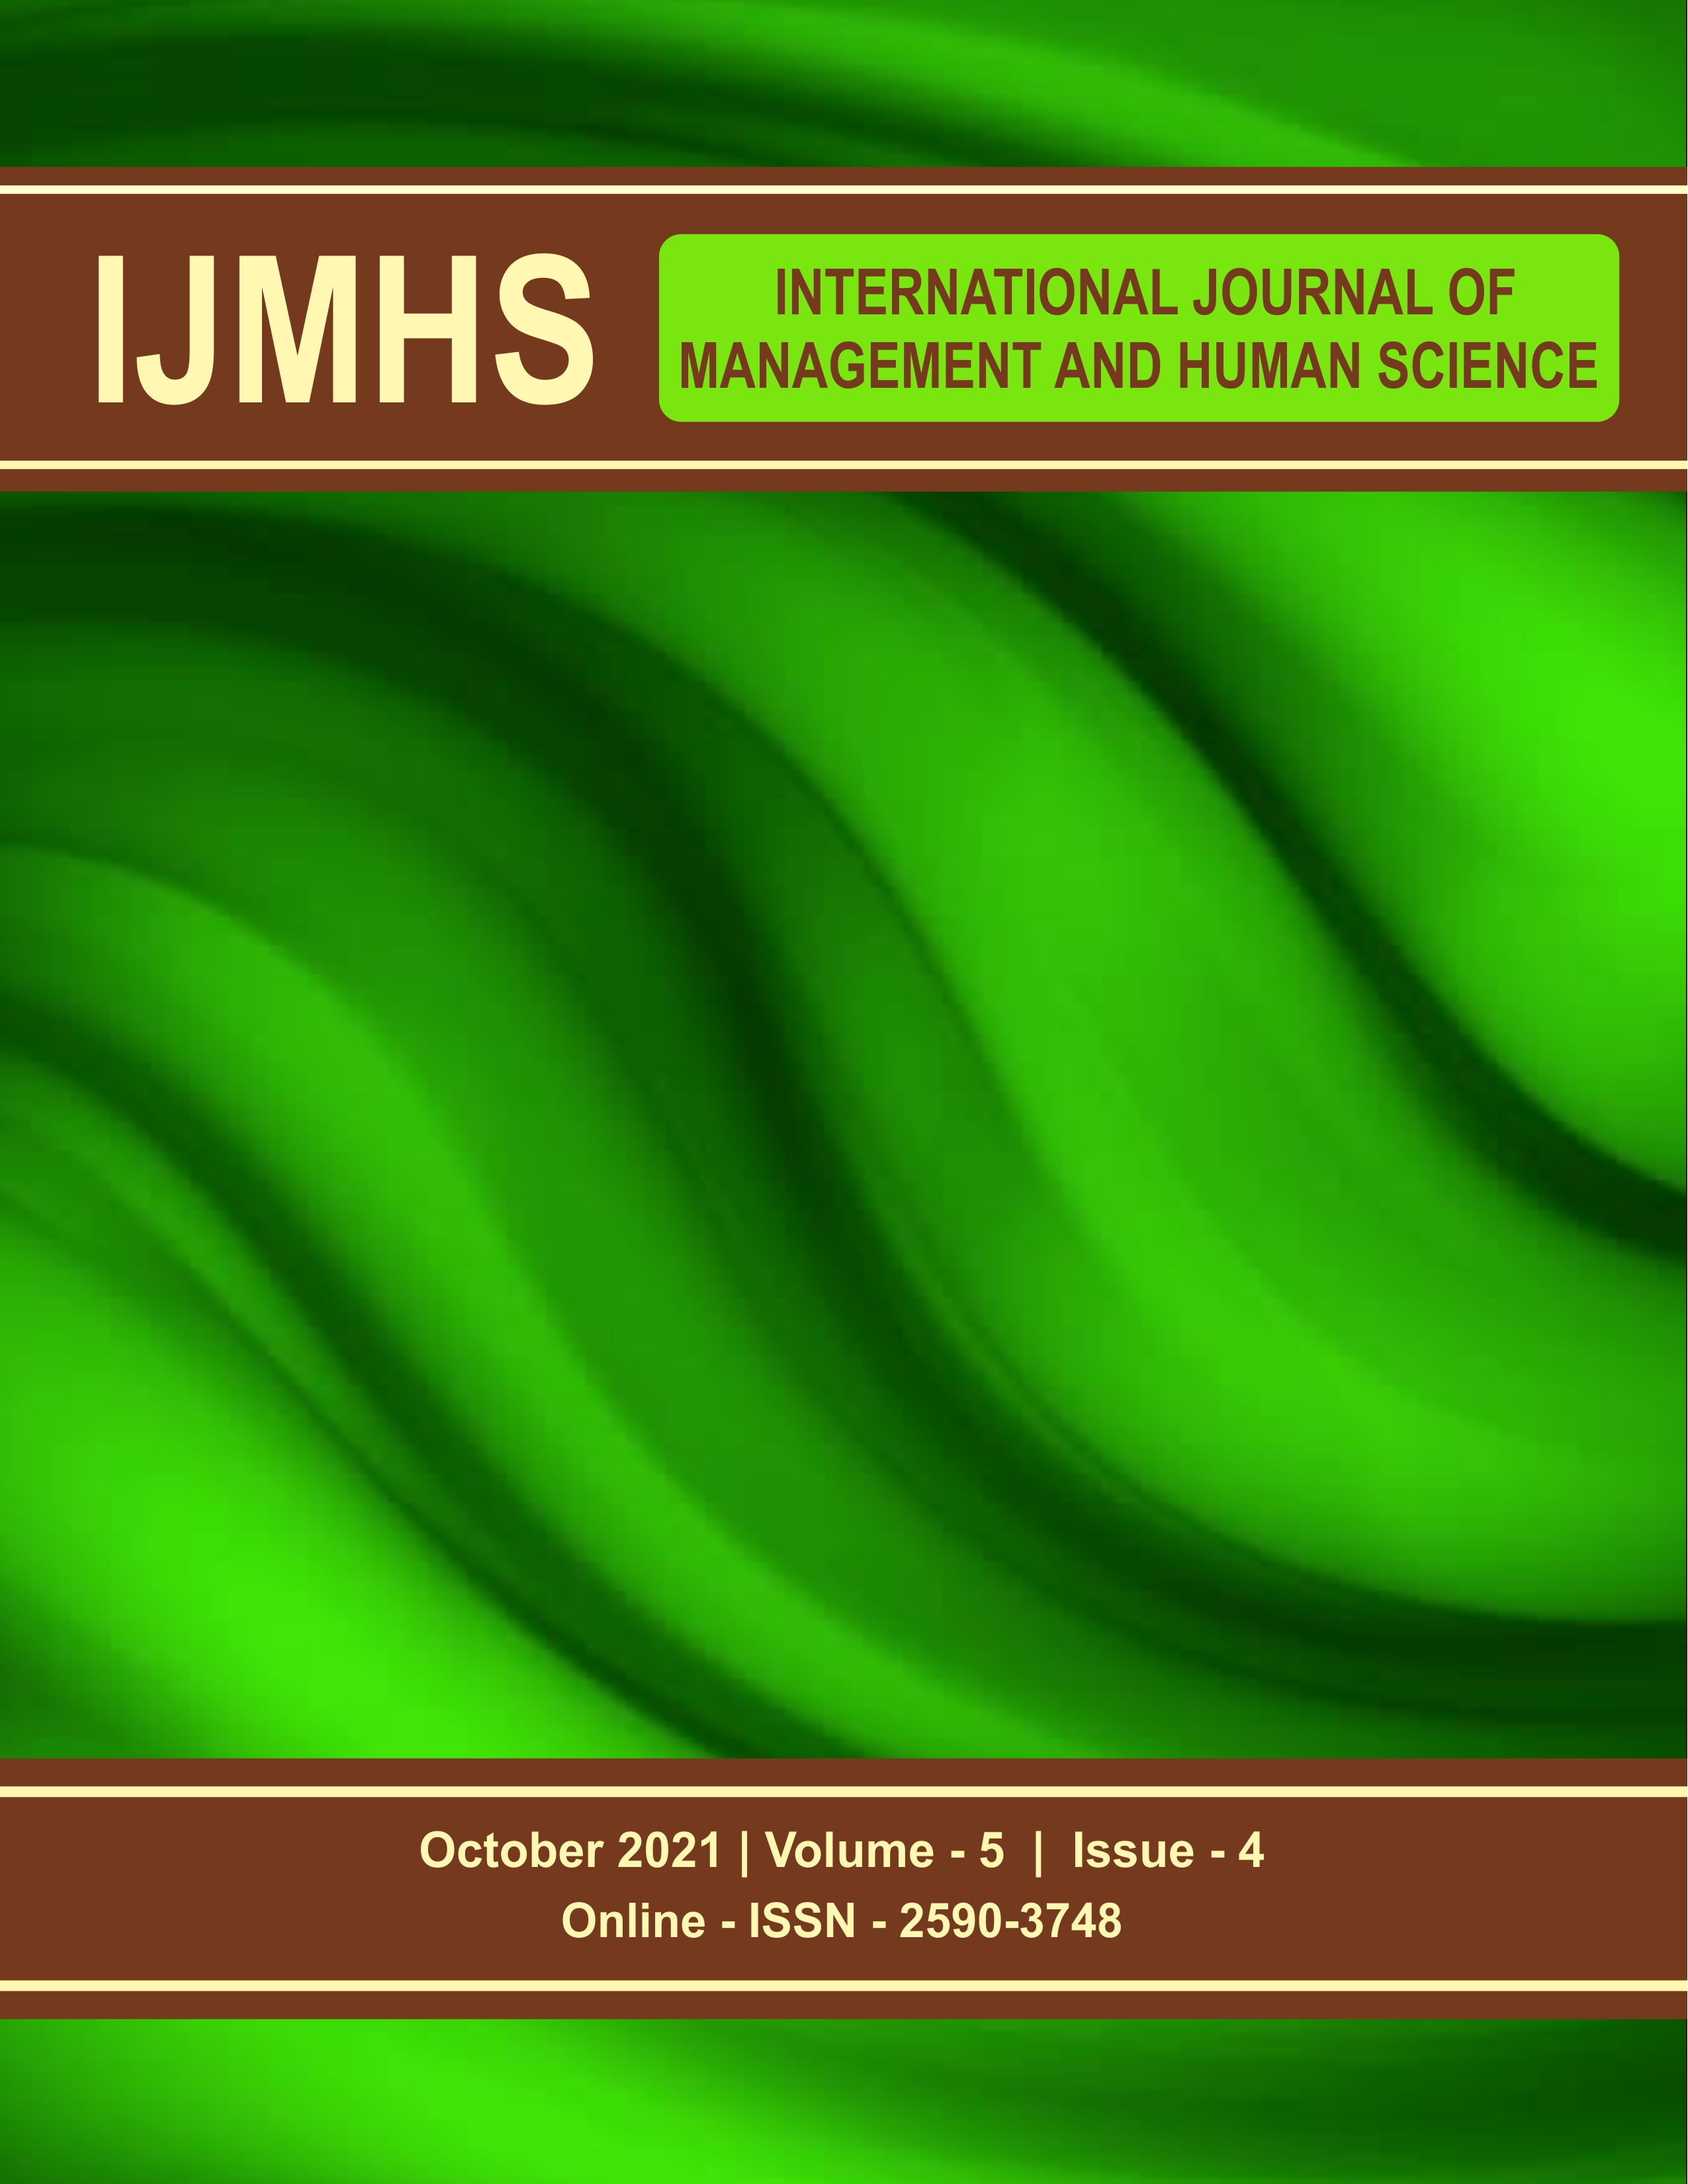 					View Vol. 5 No. 4 (2021): International Journal of Management and Human Science (IJMHS)
				